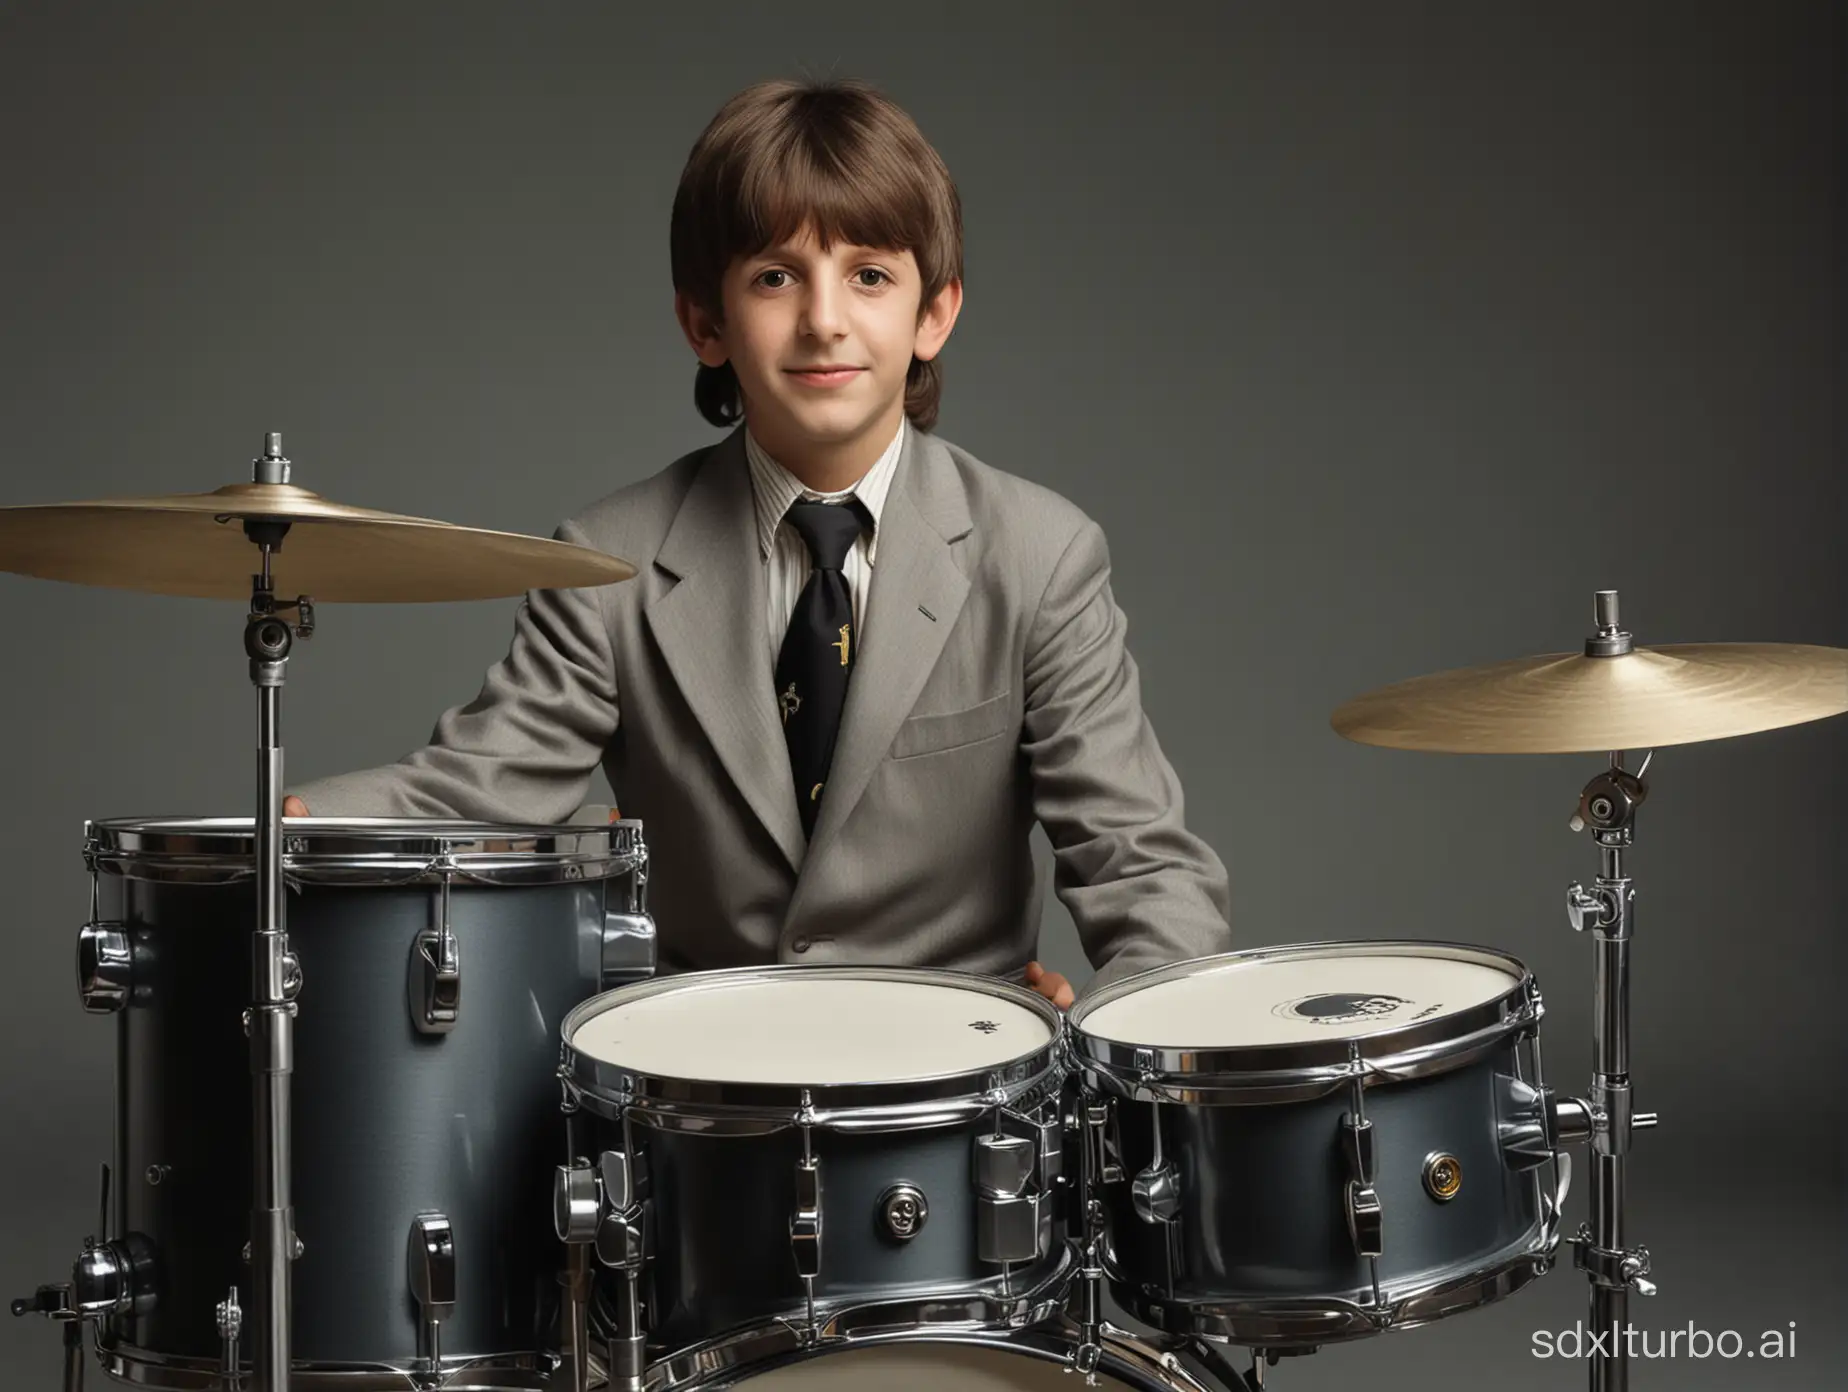 BEATLES DRUMMER Ringo Starr depicted as an 11 year old child sitting behind a drum set. PHOTO REALISTIC IMAGING.